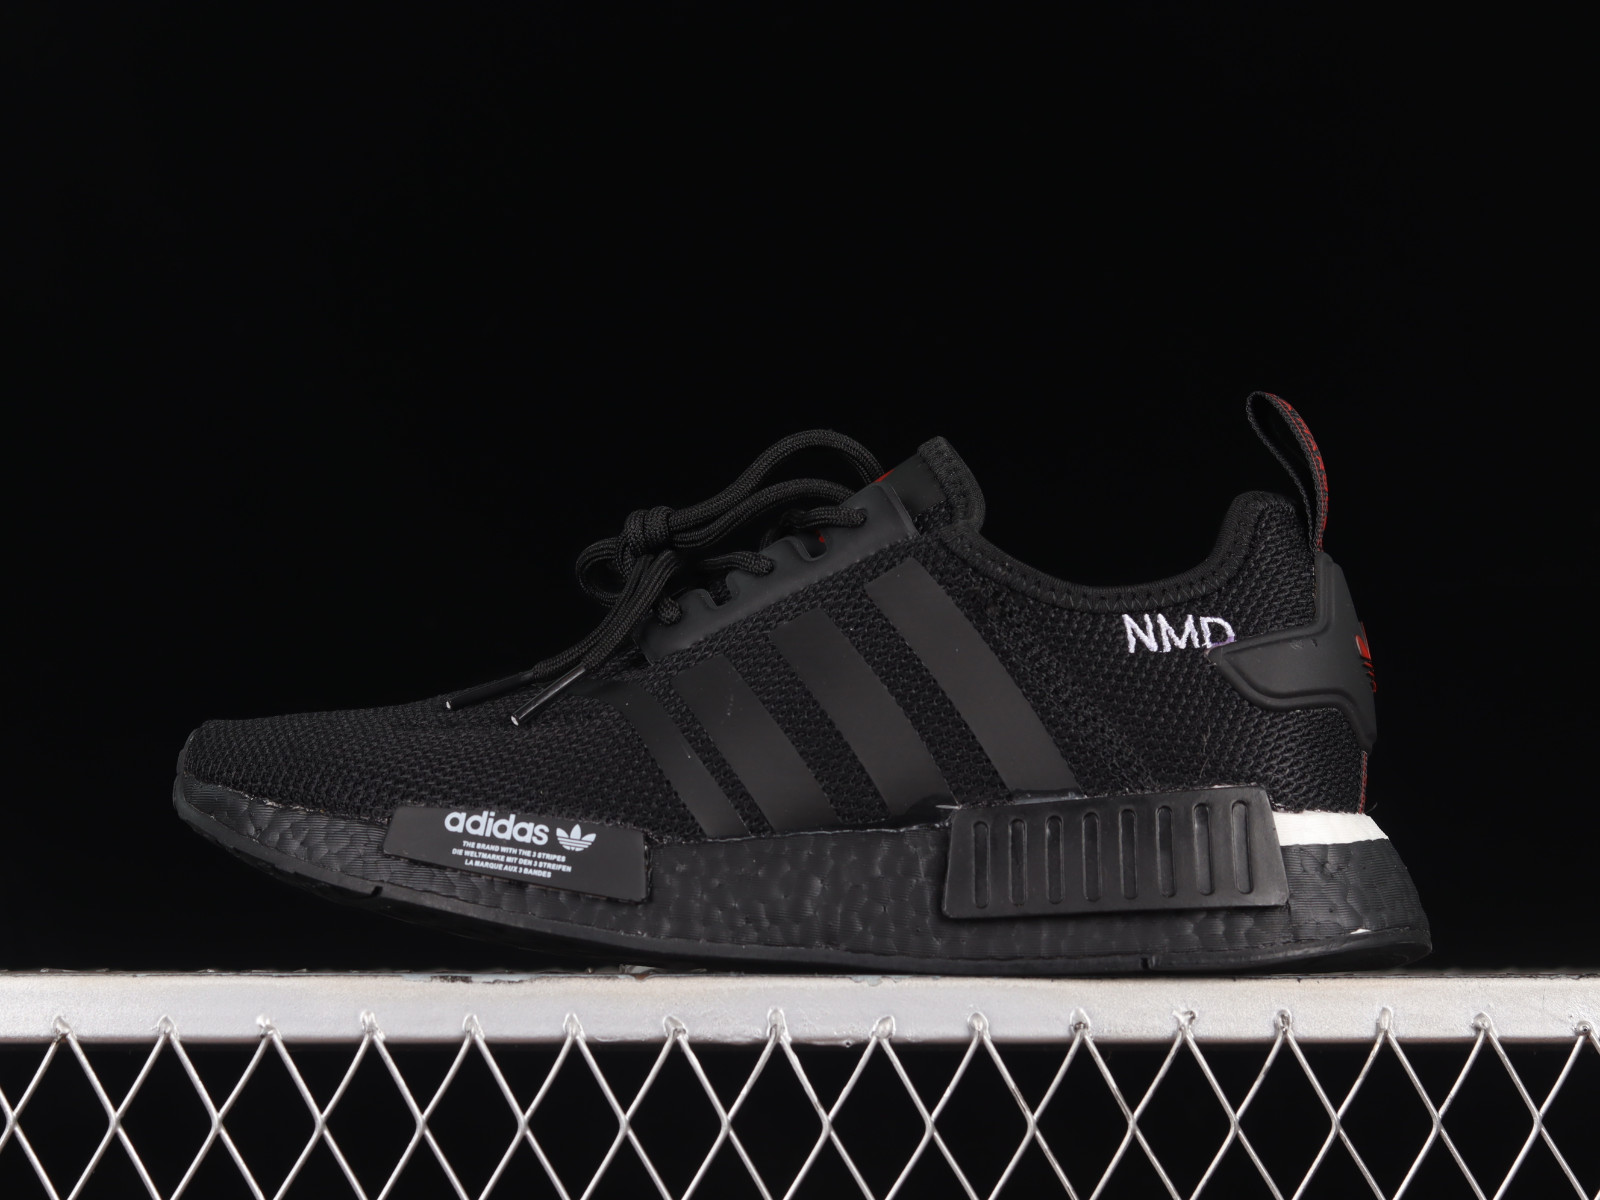 Adidas nmd NMD R1 Boost Core Black White Red - Sepsale - free giveaway 2018 live chat